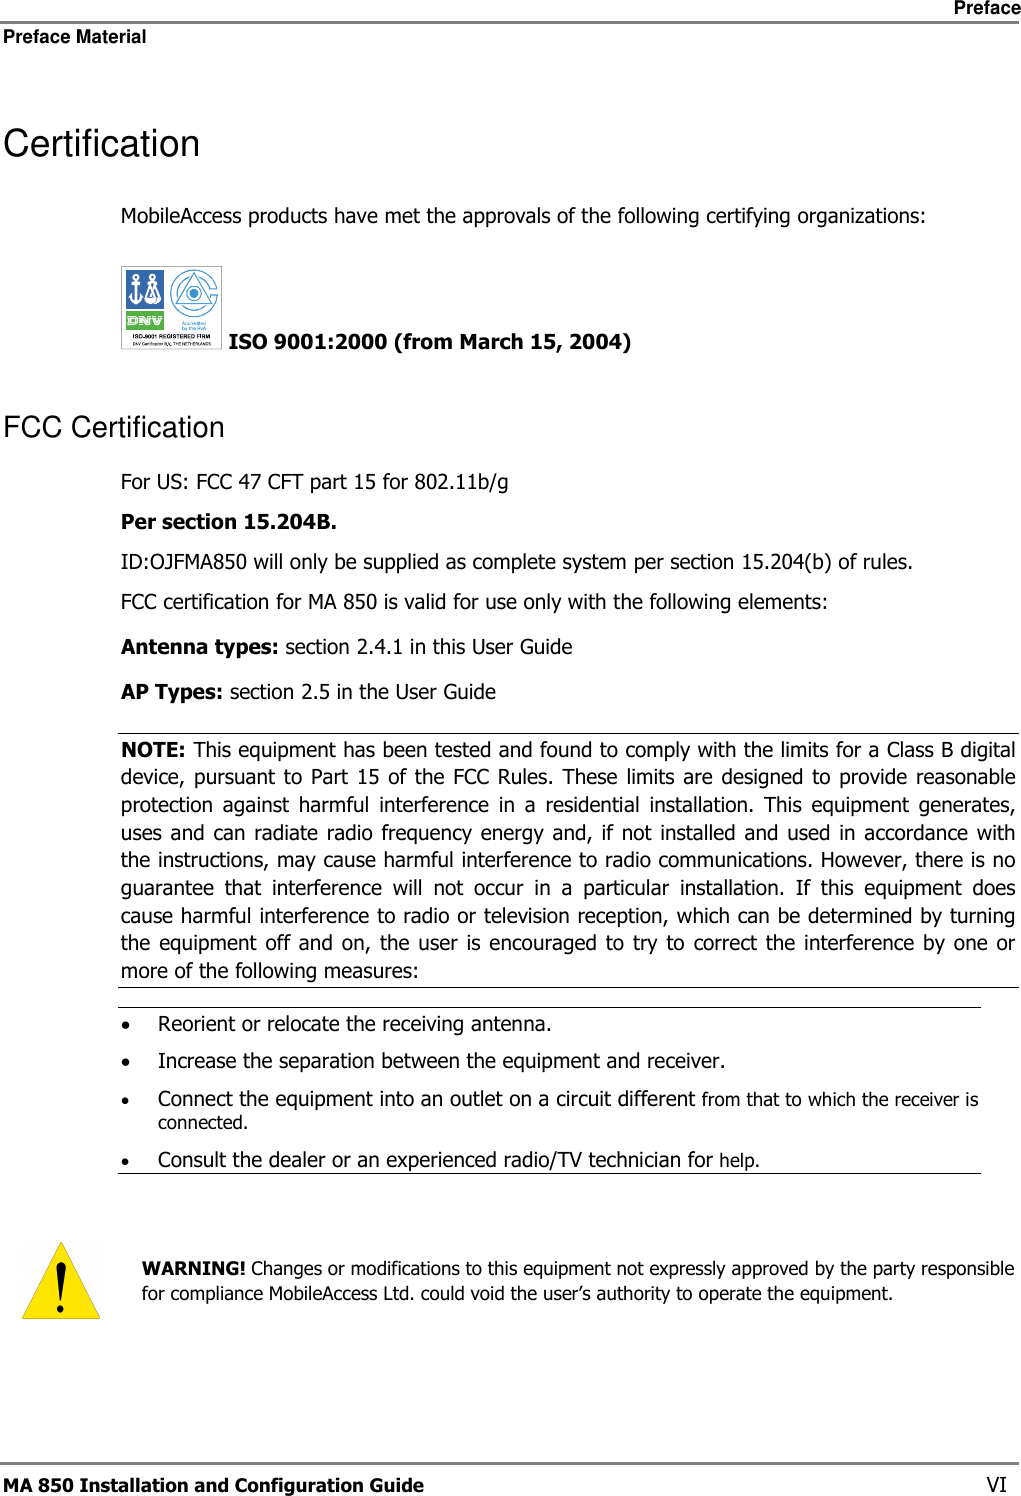     Preface Preface Material      MA 850 Installation and Configuration Guide    VI Certification MobileAccess products have met the approvals of the following certifying organizations:   ISO 9001:2000 (from March 15, 2004)  FCC Certification For US: FCC 47 CFT part 15 for 802.11b/g Per section 15.204B.  ID:OJFMA850 will only be supplied as complete system per section 15.204(b) of rules. FCC certification for MA 850 is valid for use only with the following elements: Antenna types: section  2.4.1 in this User Guide AP Types: section  2.5 in the User Guide NOTE: This equipment has been tested and found to comply with the limits for a Class B digital device, pursuant  to Part  15 of the  FCC Rules.  These  limits are designed  to provide  reasonable protection  against  harmful  interference  in  a  residential  installation.  This  equipment  generates, uses and can radiate radio  frequency energy  and,  if  not installed  and used in accordance with the instructions, may cause harmful interference to radio communications. However, there is no guarantee  that  interference  will  not  occur  in  a  particular  installation.  If  this  equipment  does cause harmful interference to radio or television reception, which can be determined by turning the equipment off and on,  the user  is  encouraged to  try  to correct  the interference by one or more of the following measures: • Reorient or relocate the receiving antenna. • Increase the separation between the equipment and receiver. • Connect the equipment into an outlet on a circuit different from that to which the receiver is connected. • Consult the dealer or an experienced radio/TV technician for help.    WARNING! Changes or modifications to this equipment not expressly approved by the party responsible for compliance MobileAccess Ltd. could void the user’s authority to operate the equipment. 